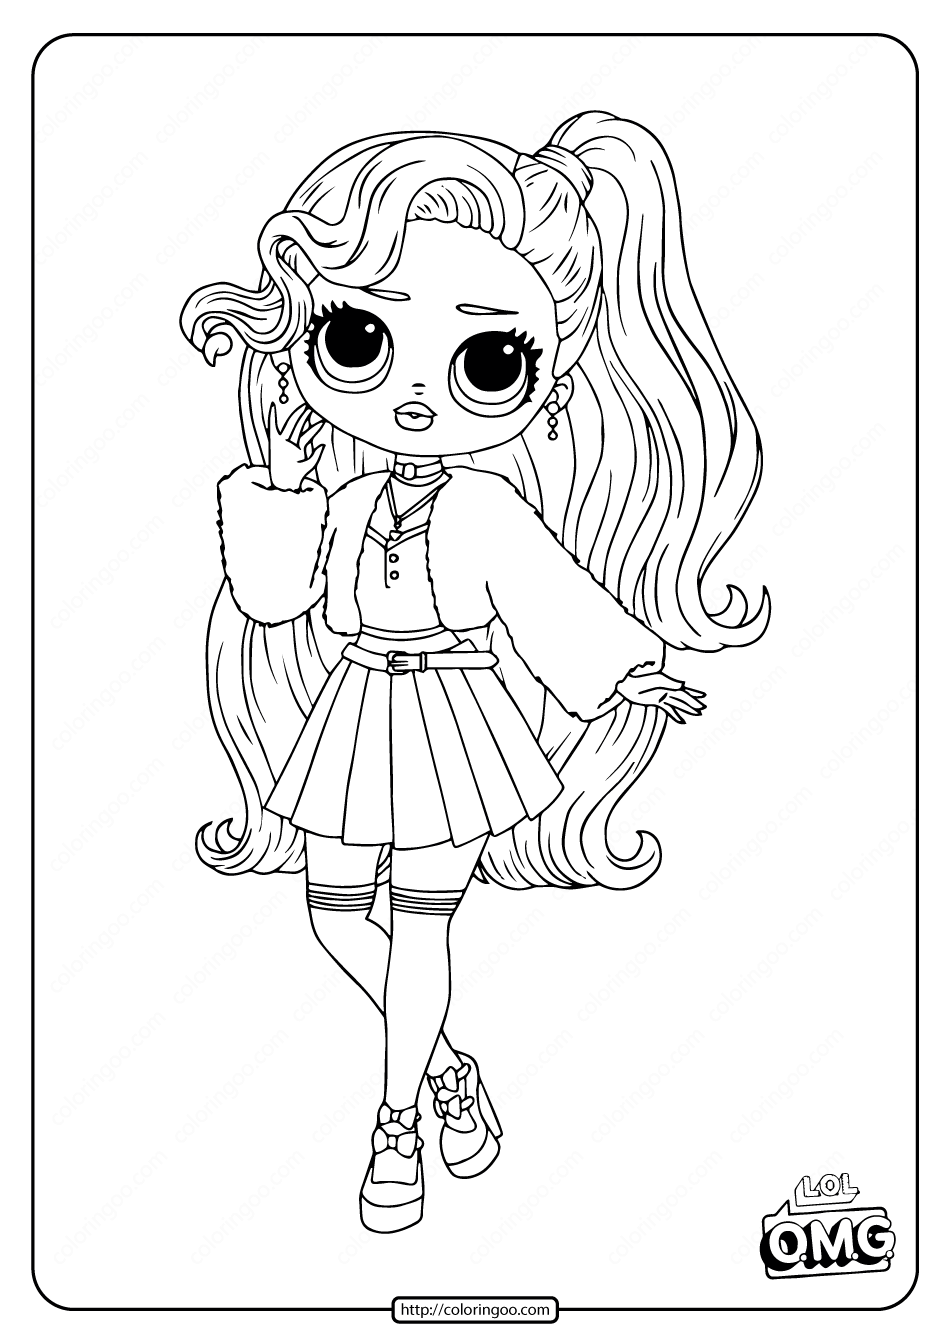 lol srprise omg pink baby coloring page